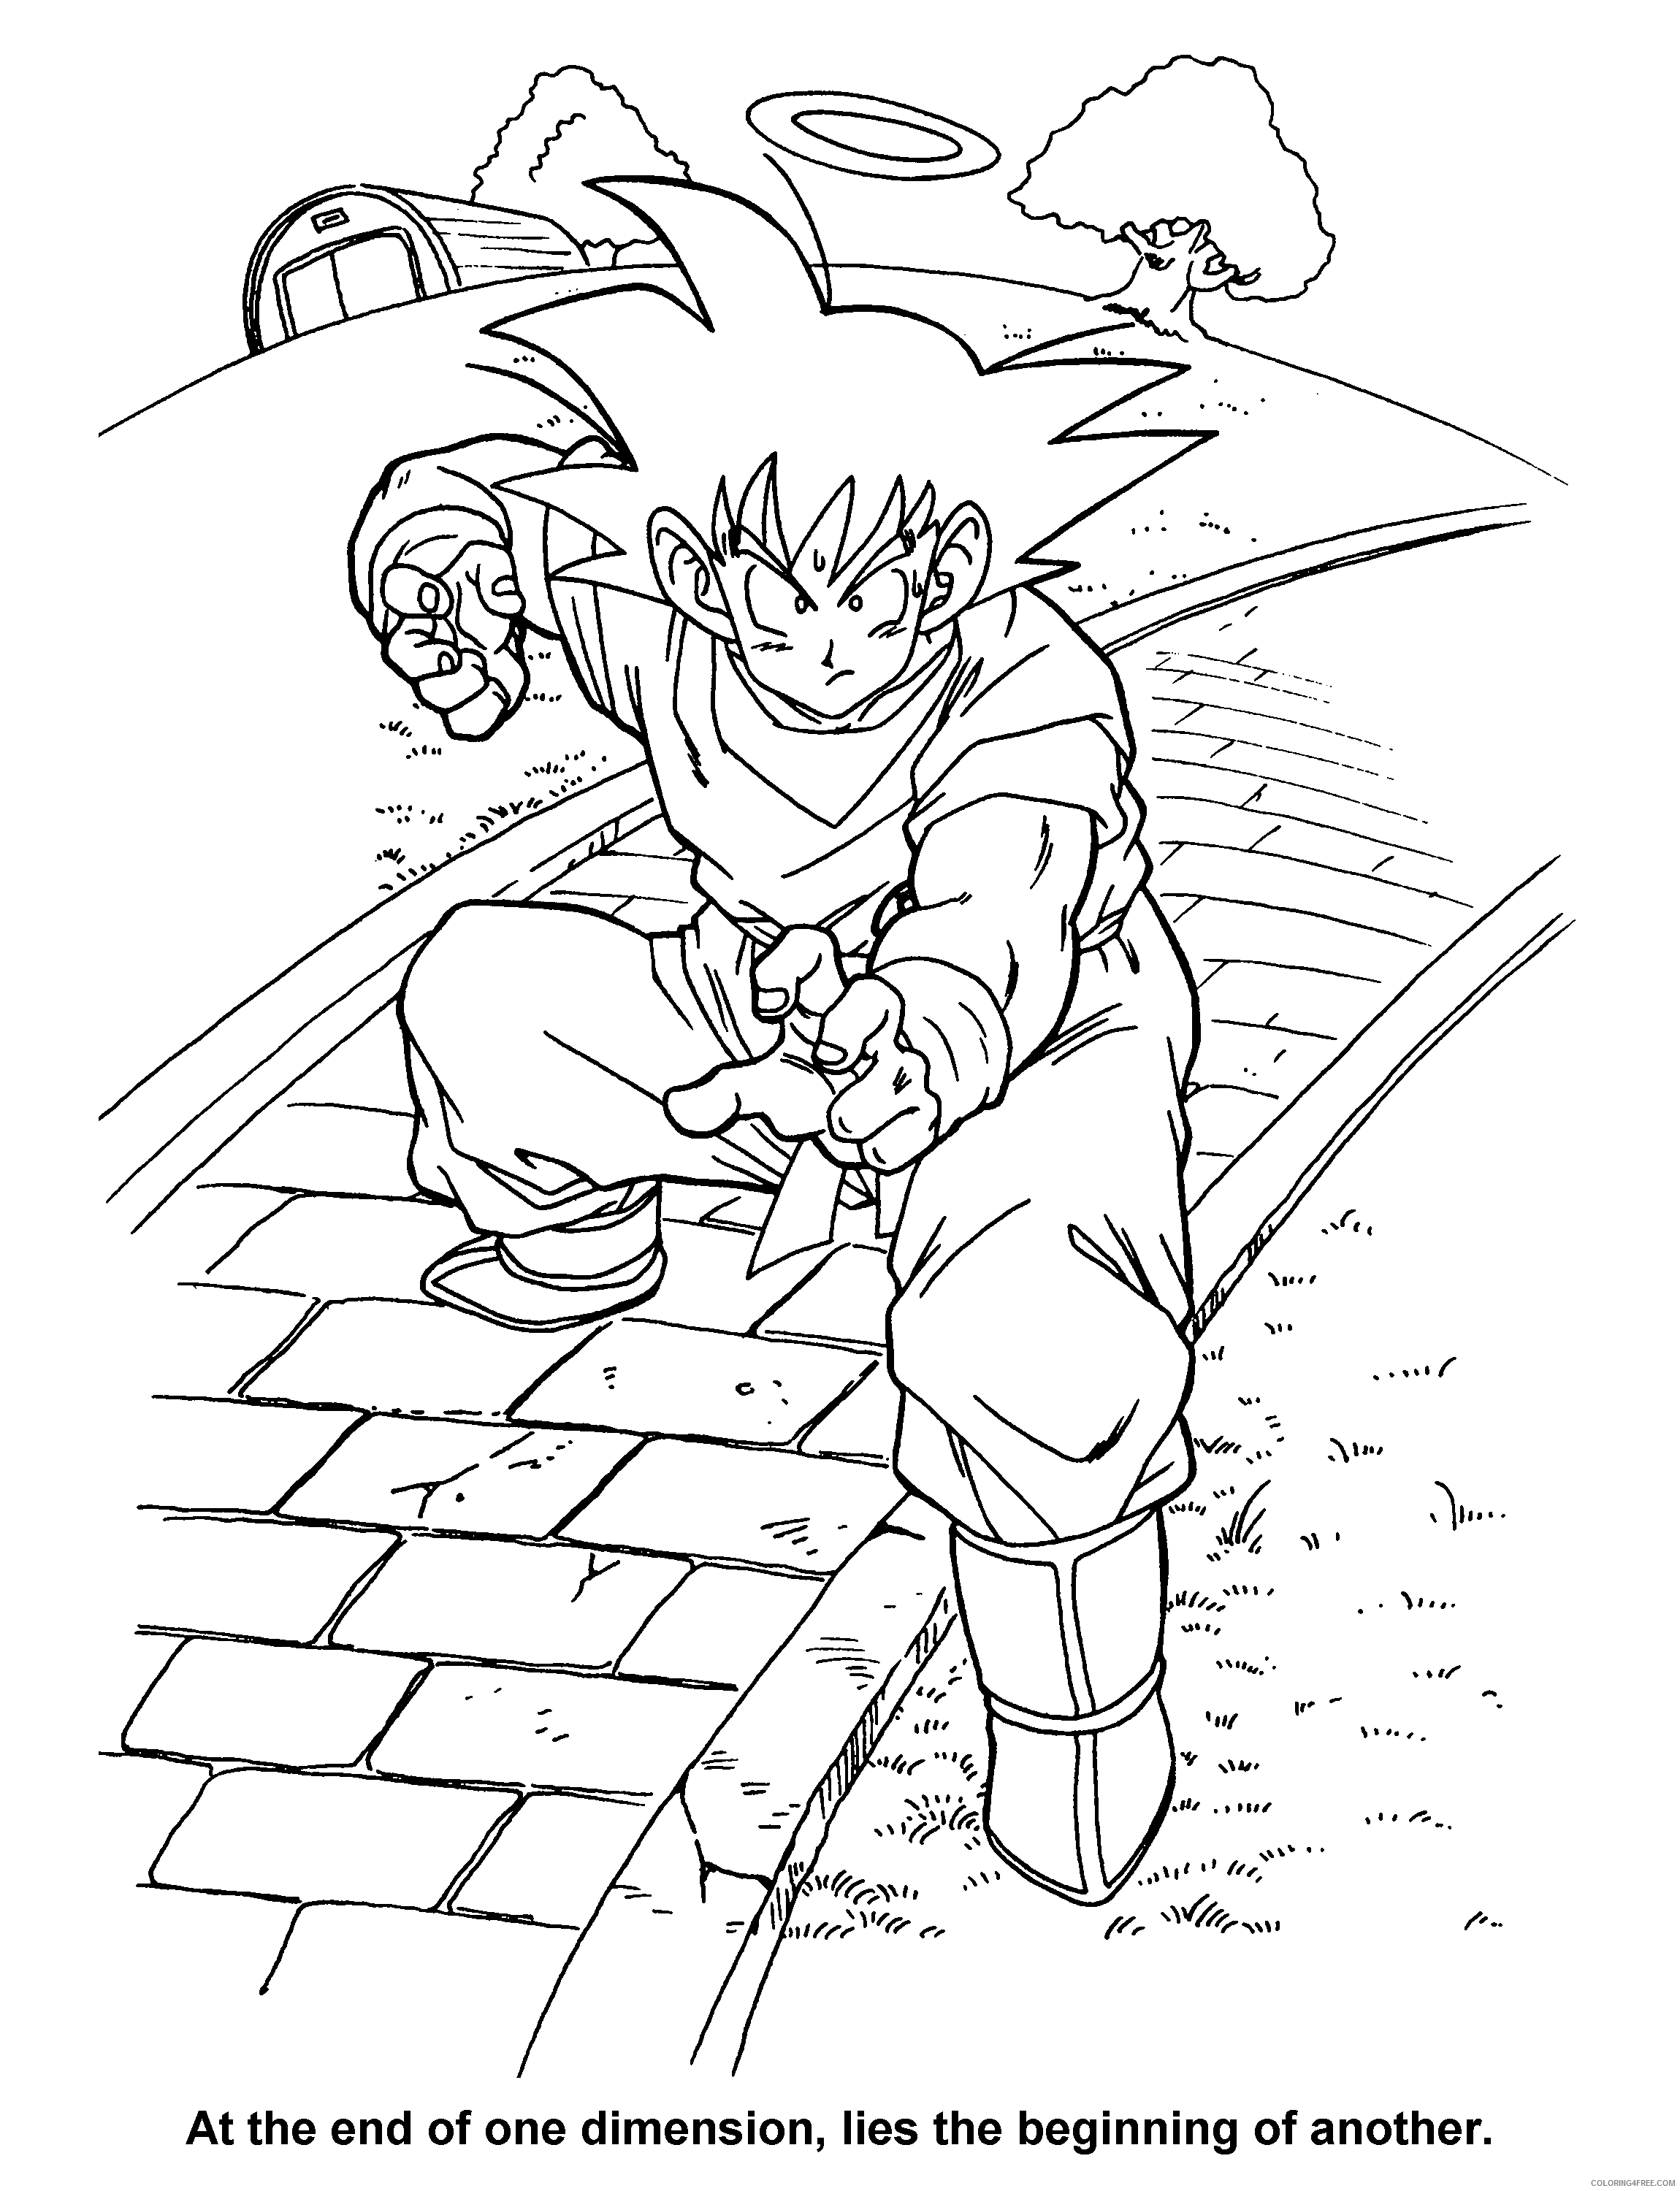 001 dragon ball z at the end of one dimension Printable Coloring4free